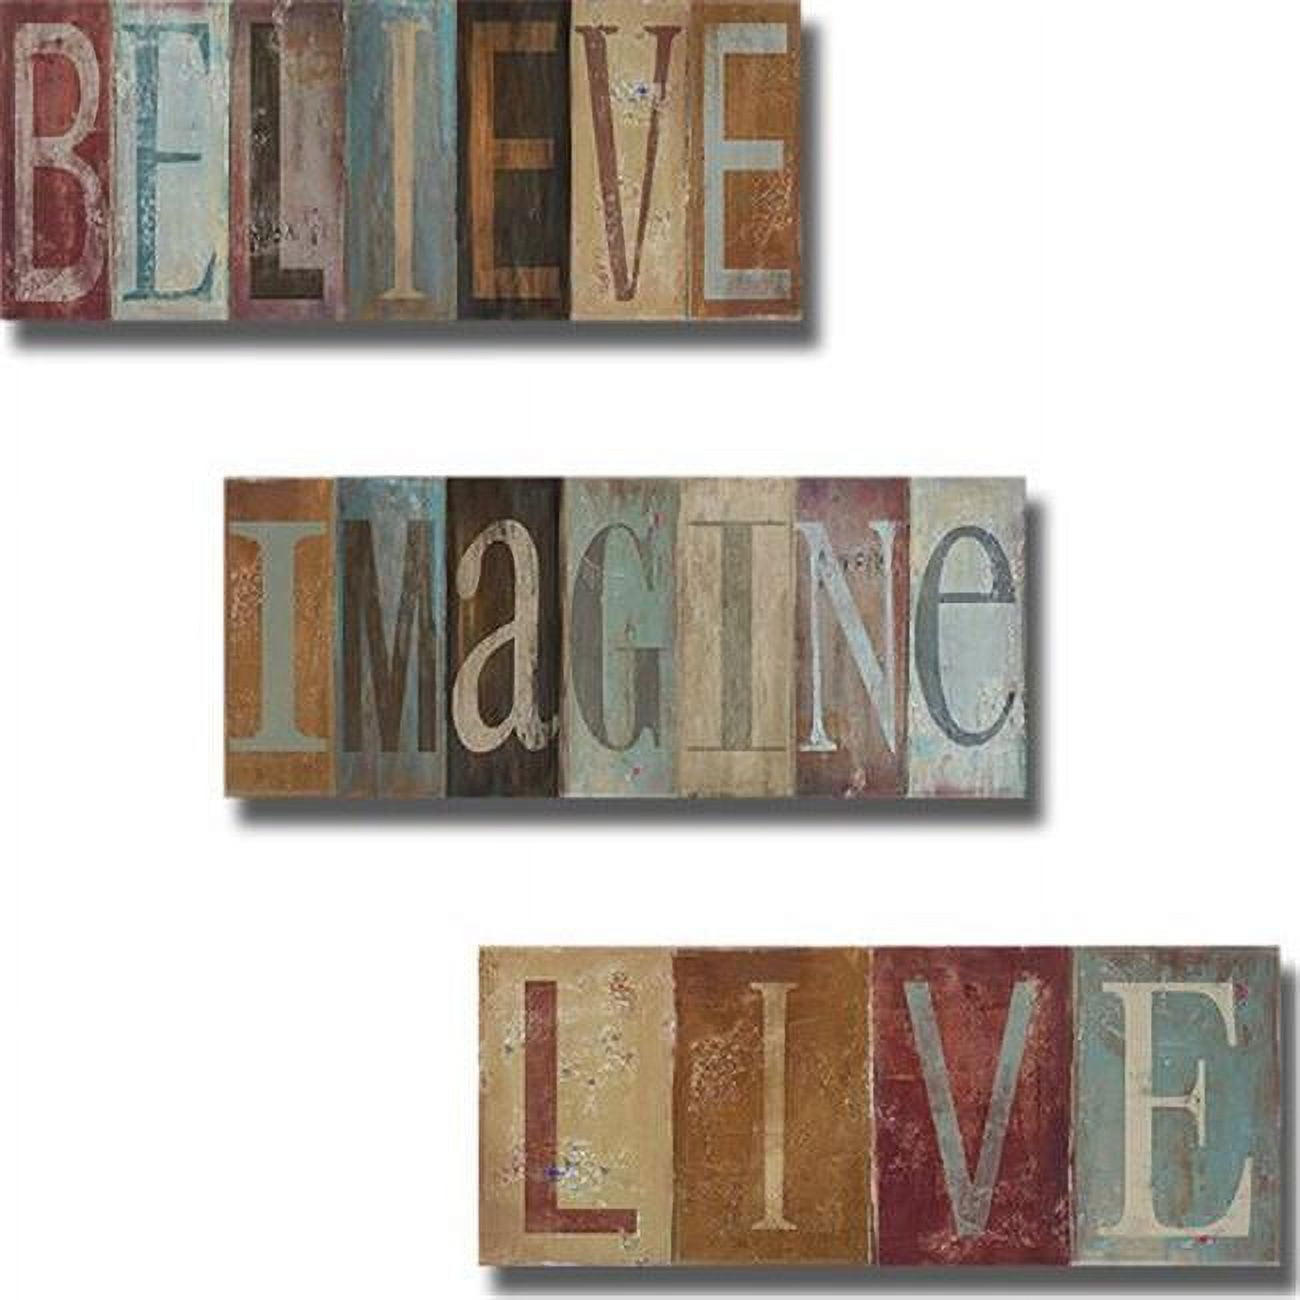 1640am146sg Believe, Imagine, & Live By Patricia Pinto 3 Piece Premium Oversize Gallery Wrapped Canvas Giclee Art Set - 40 X 16 X 1.5 In.